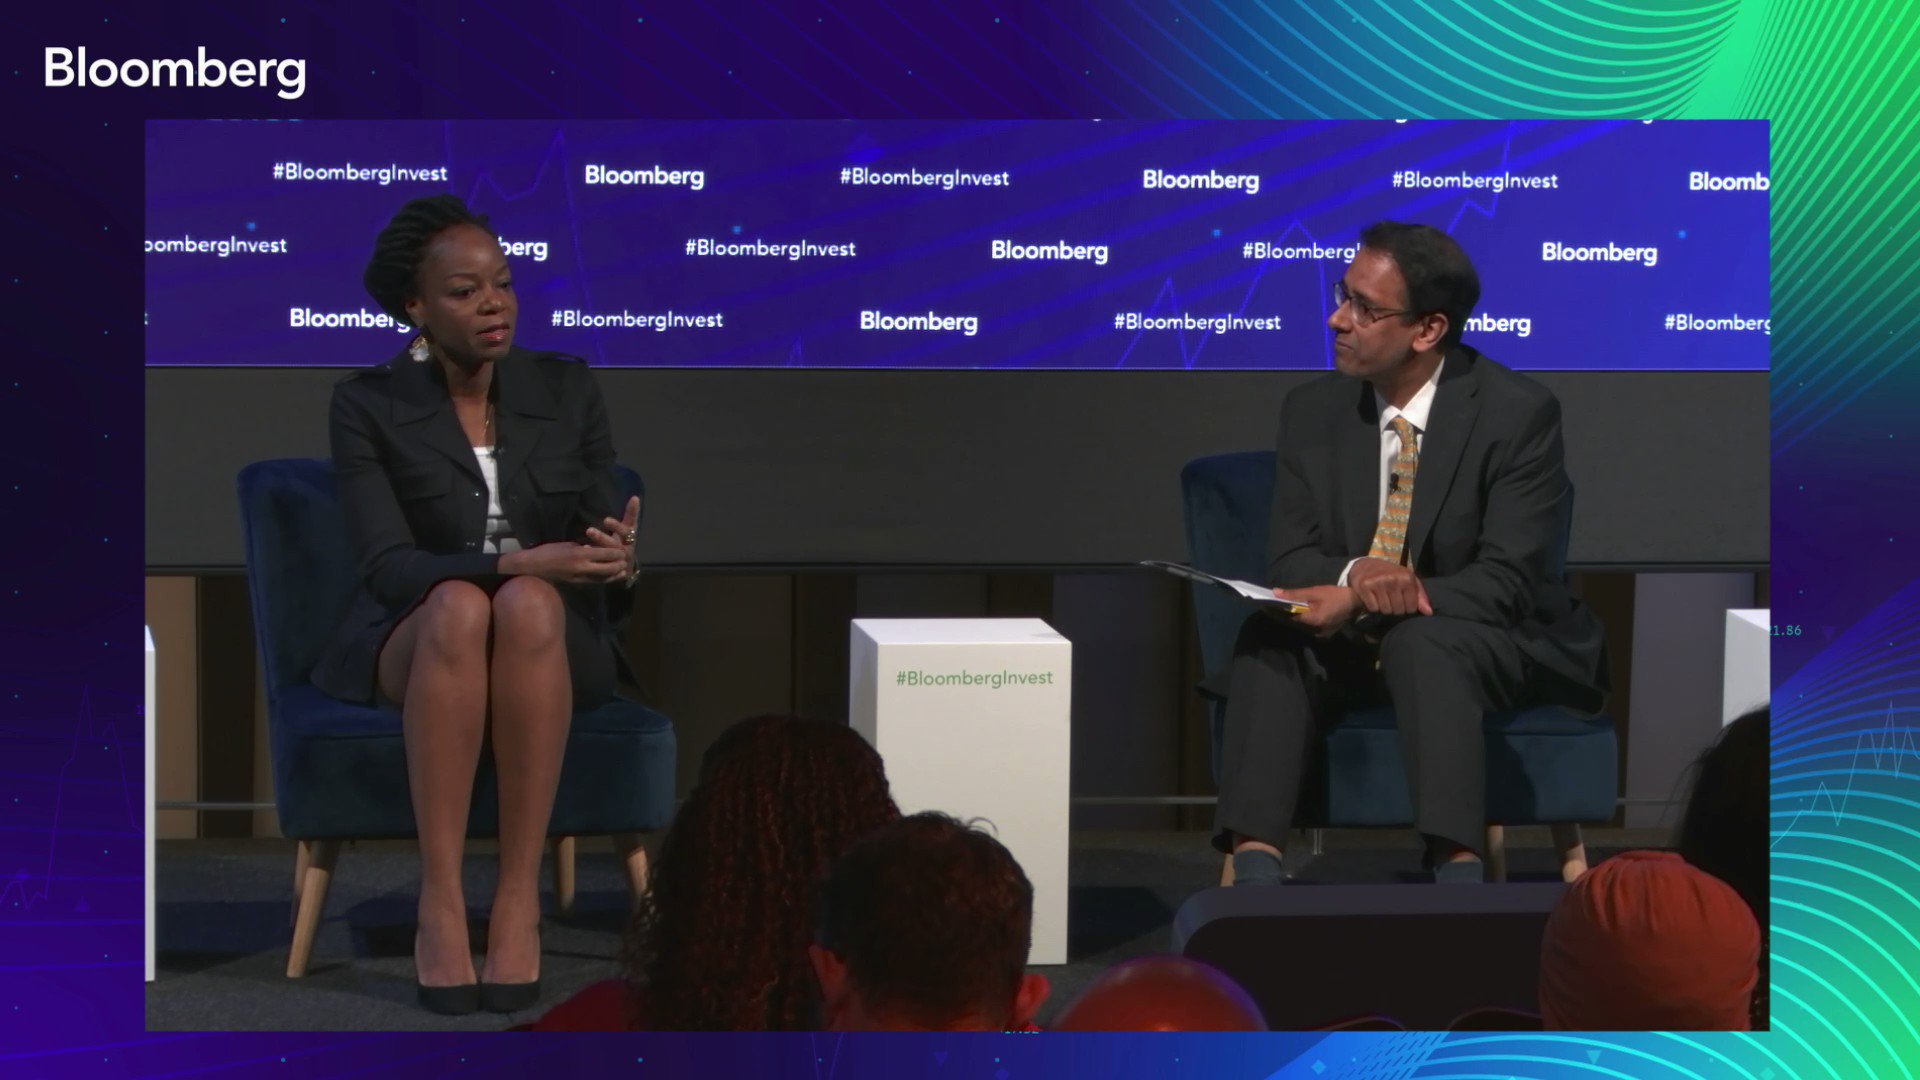 @BloombergLive: "In this digitized world, when you collect data it has to serve a purpose." Minister for Digital Economy @GouvTg @cinalawson tells @business Arijit Ghosh (@KHASBAAT) #BloombergInvest